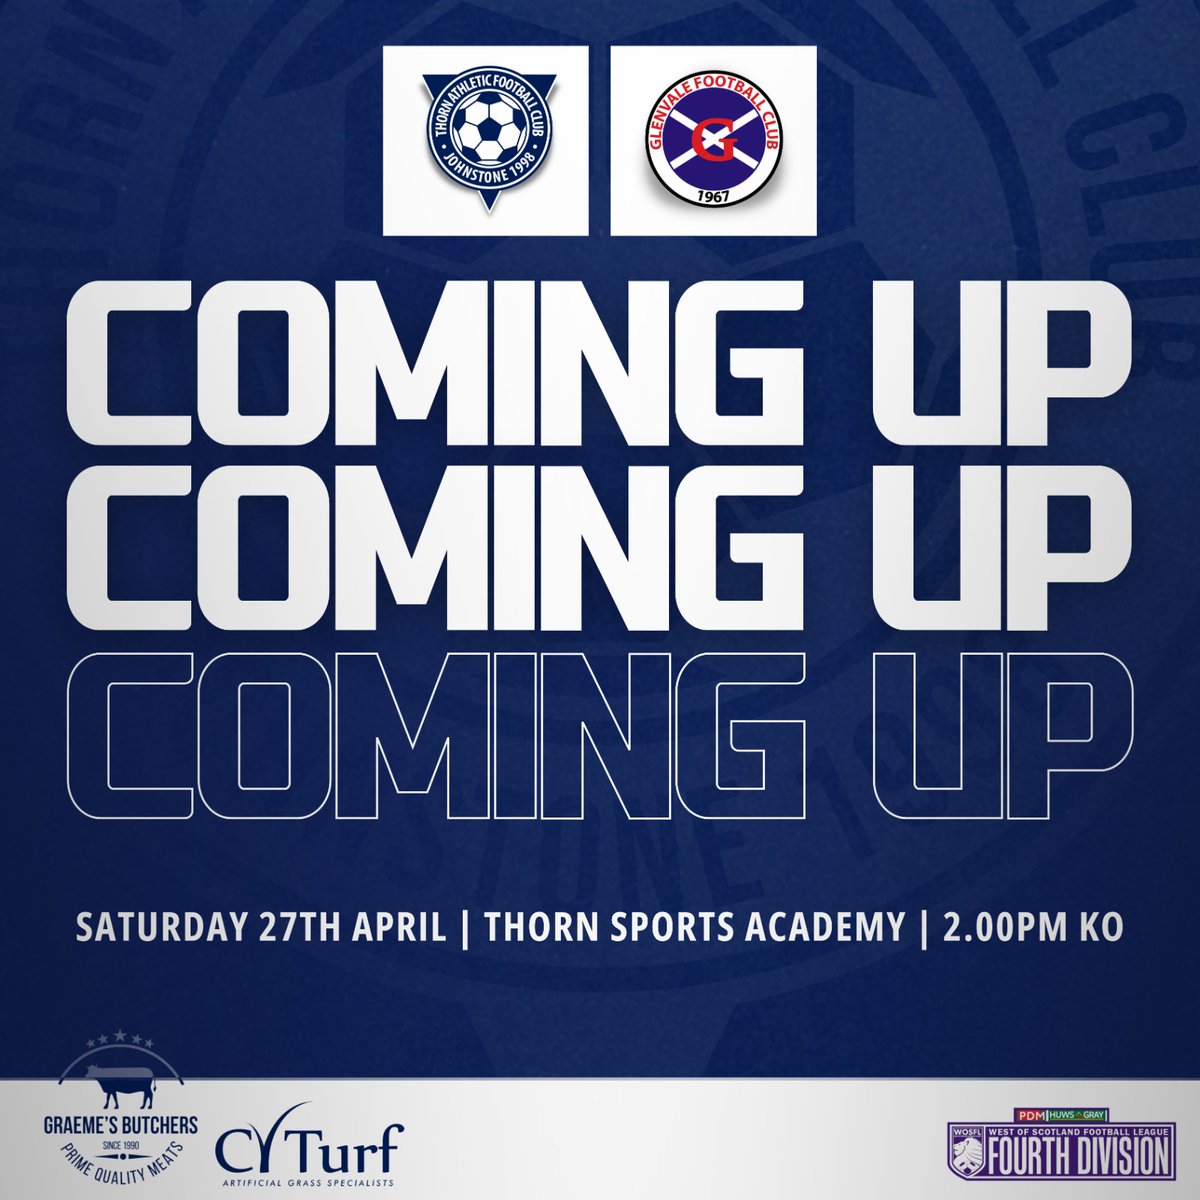 𝘿𝙀𝙍𝘽𝙔 𝘾𝙊𝙐𝙉𝙏𝘿𝙊𝙒𝙉 ||

Top two in the division clash in what will hopefully be a thrilling encounter between the Renfrewshire rivals.

Entry £5/3 Conc. U12 free with an adult. Season tickets are valid 🎟 

Hat-Trick Hatch Snack Bar Open for snacks and drinks 🥧 🍵